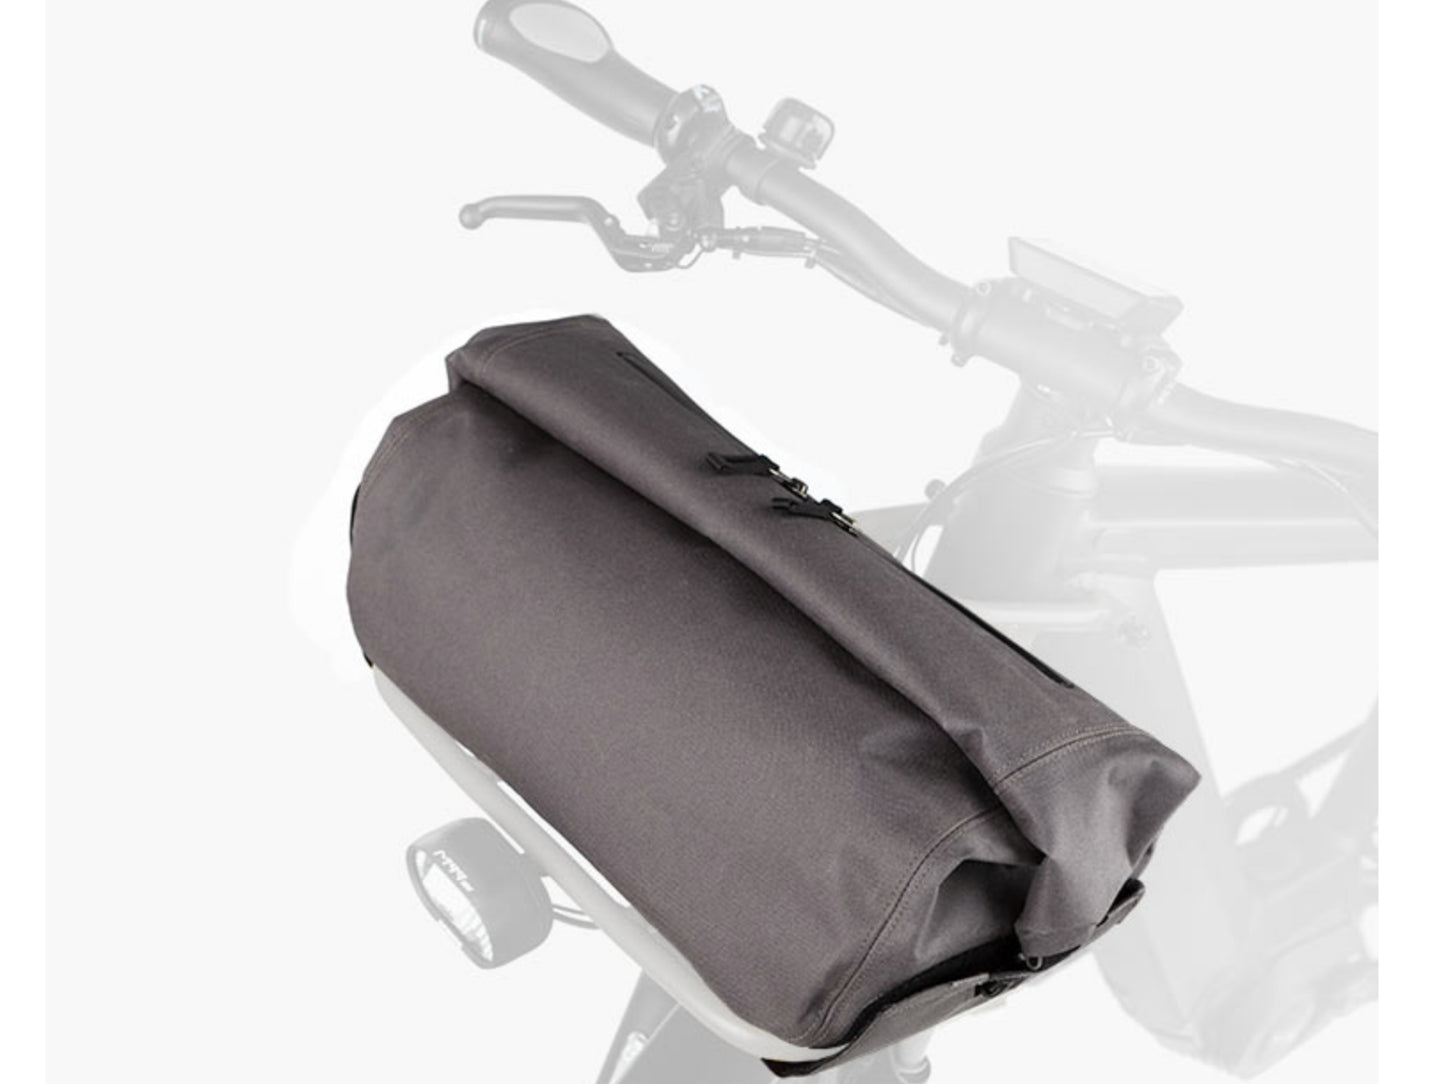 Riese and Muller Supercharger GT Rohloff HS emtb hardtail close up front carrier bag option